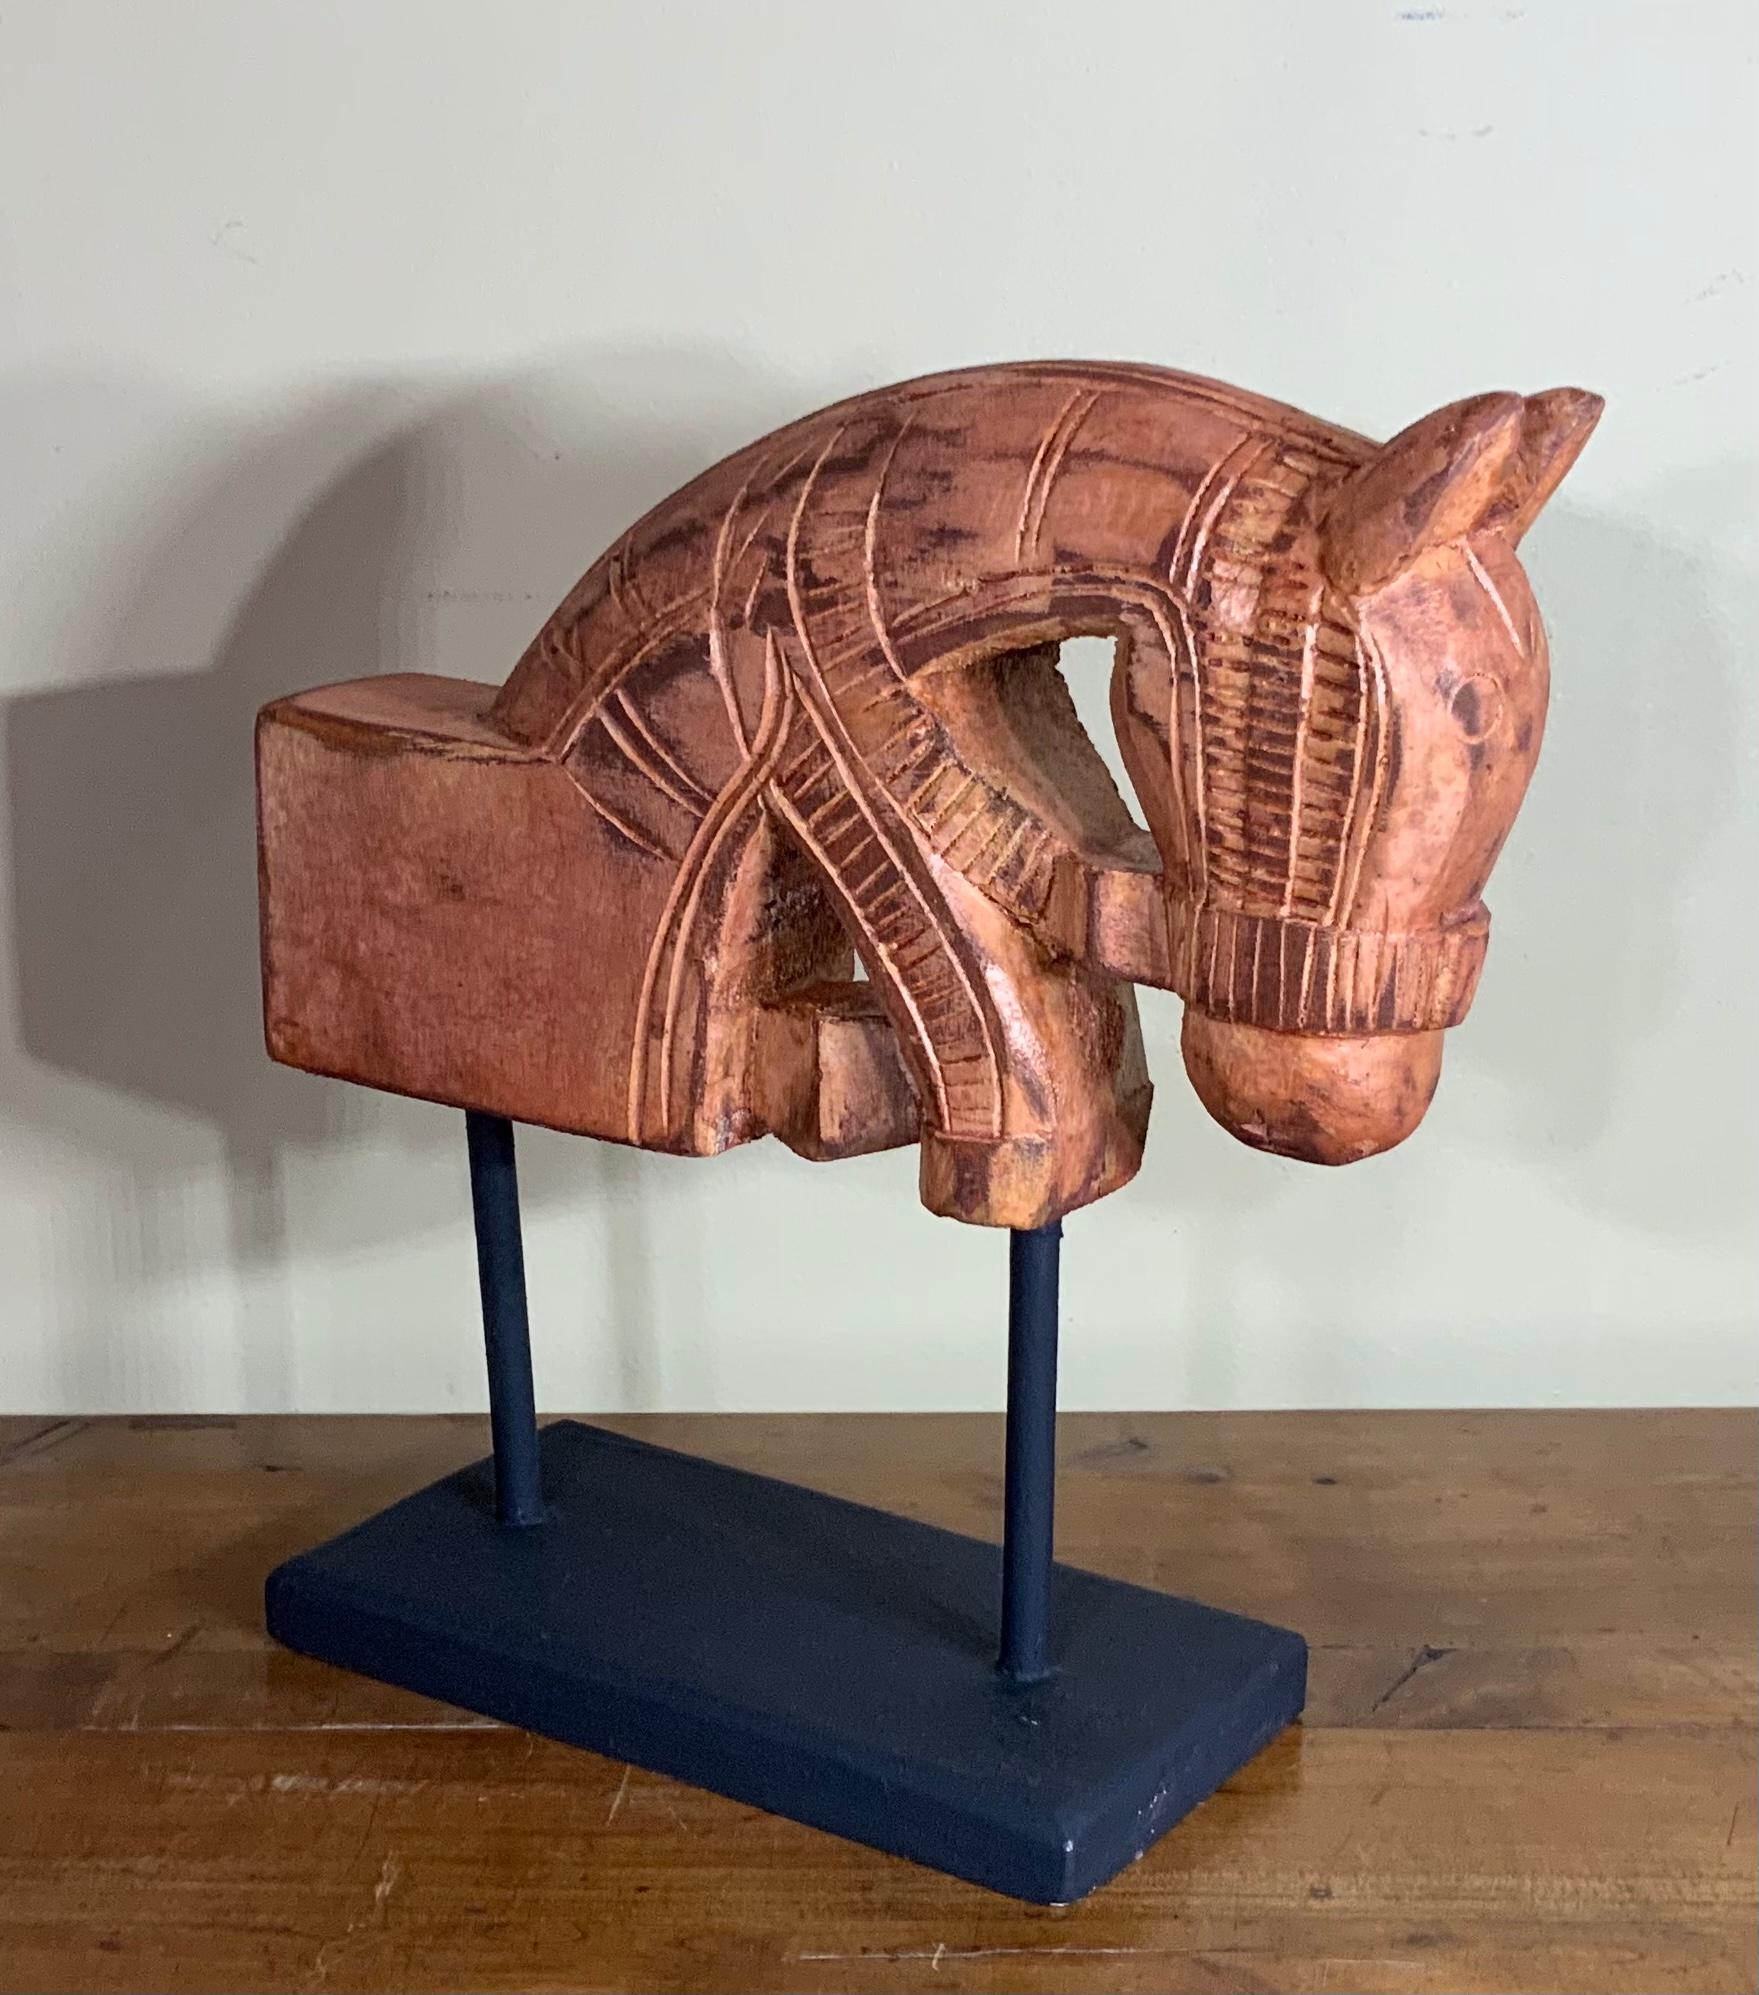 Hand-Carved Architectural Hand Carved Wood Horse For Sale